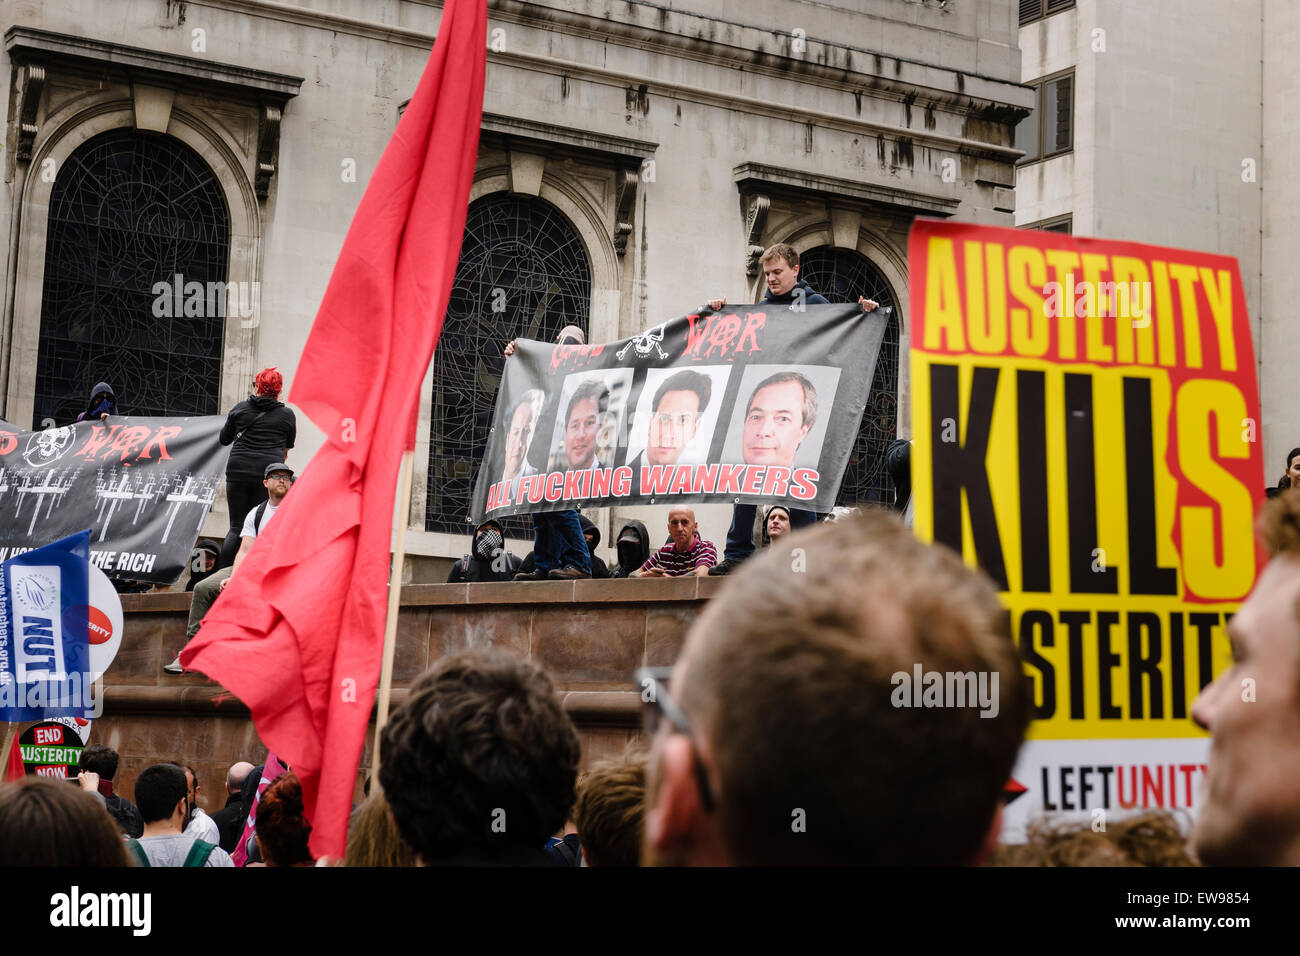 London, UK. 20th June, 2015. Masses of people marching through the streets of London on the 20th of June 2014 protesting against the Tory government's austerity politics and measures. Credit:  Tom Arne Hanslien/Alamy Live News Stock Photo